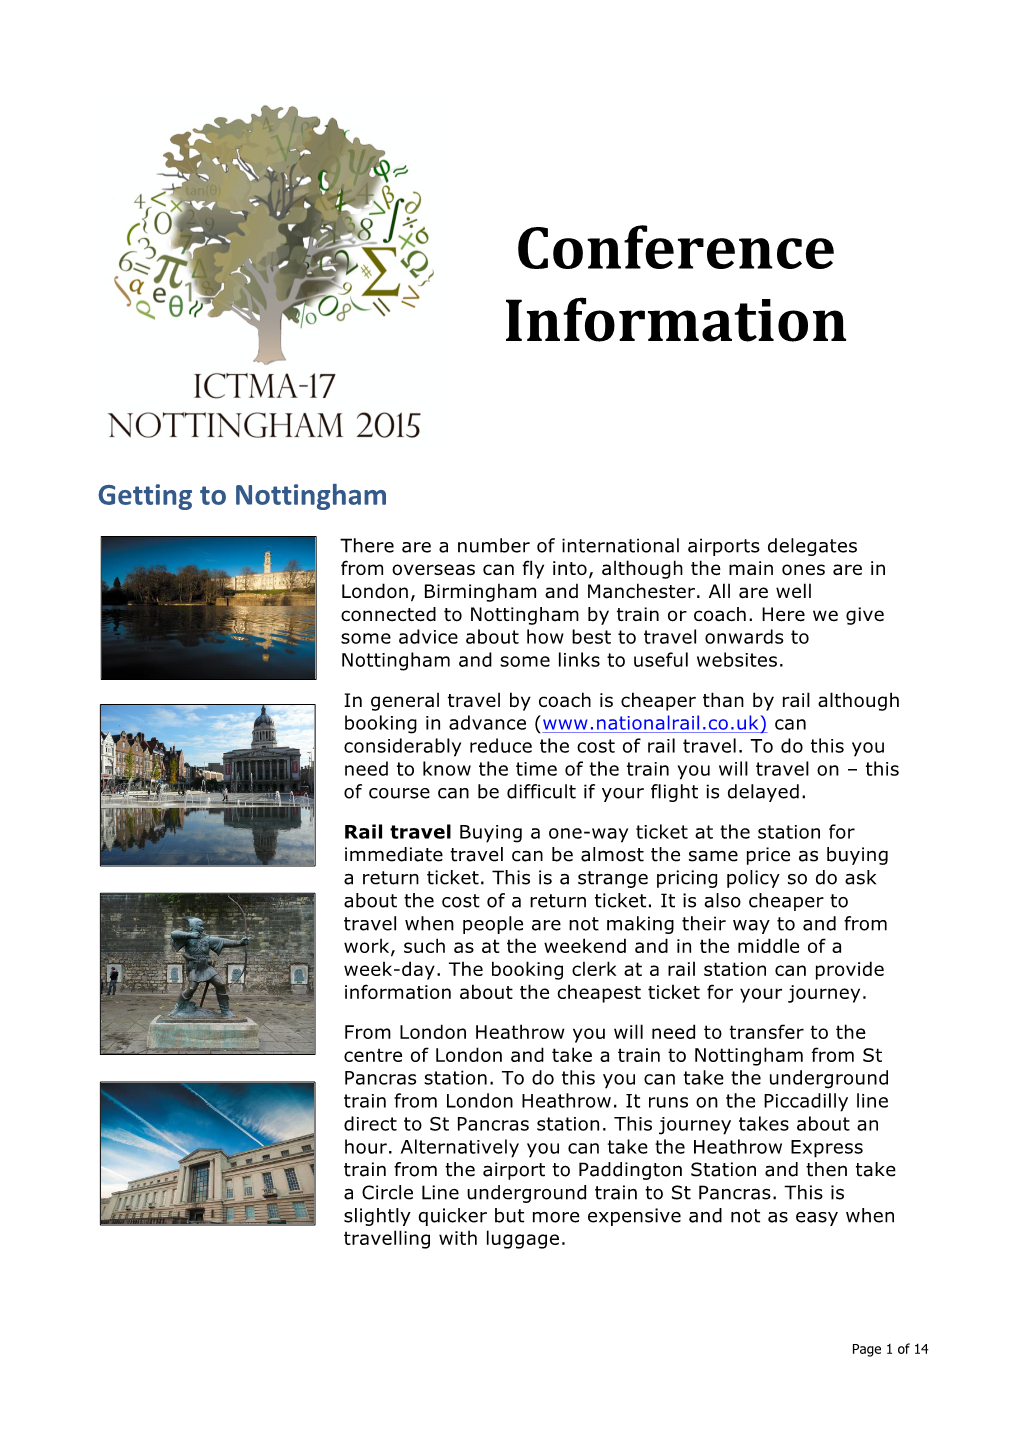 Conference Information